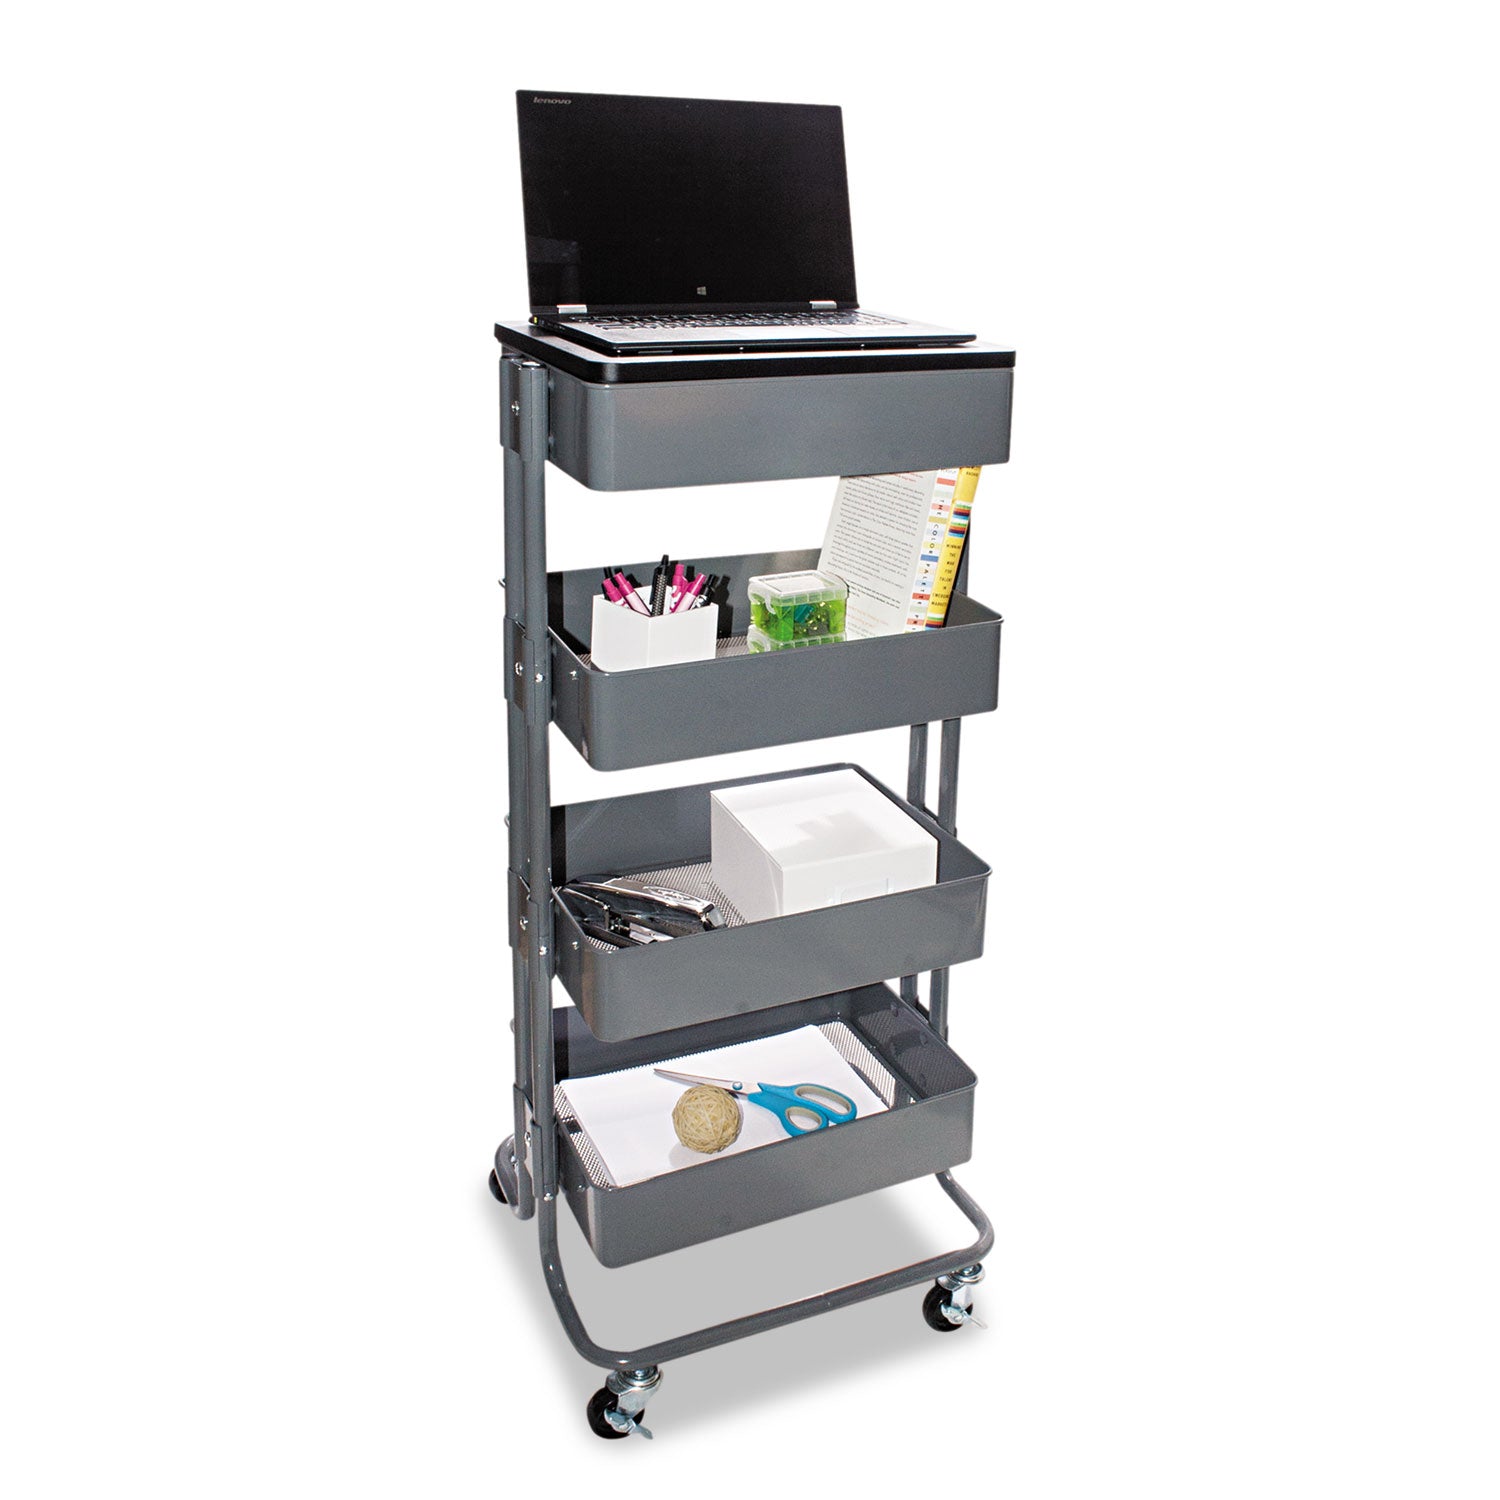 adjustable-multi-use-storage-cart-and-stand-up-workstation-1525-x-11-x-185-to-39-gray_vrtvf51025 - 1